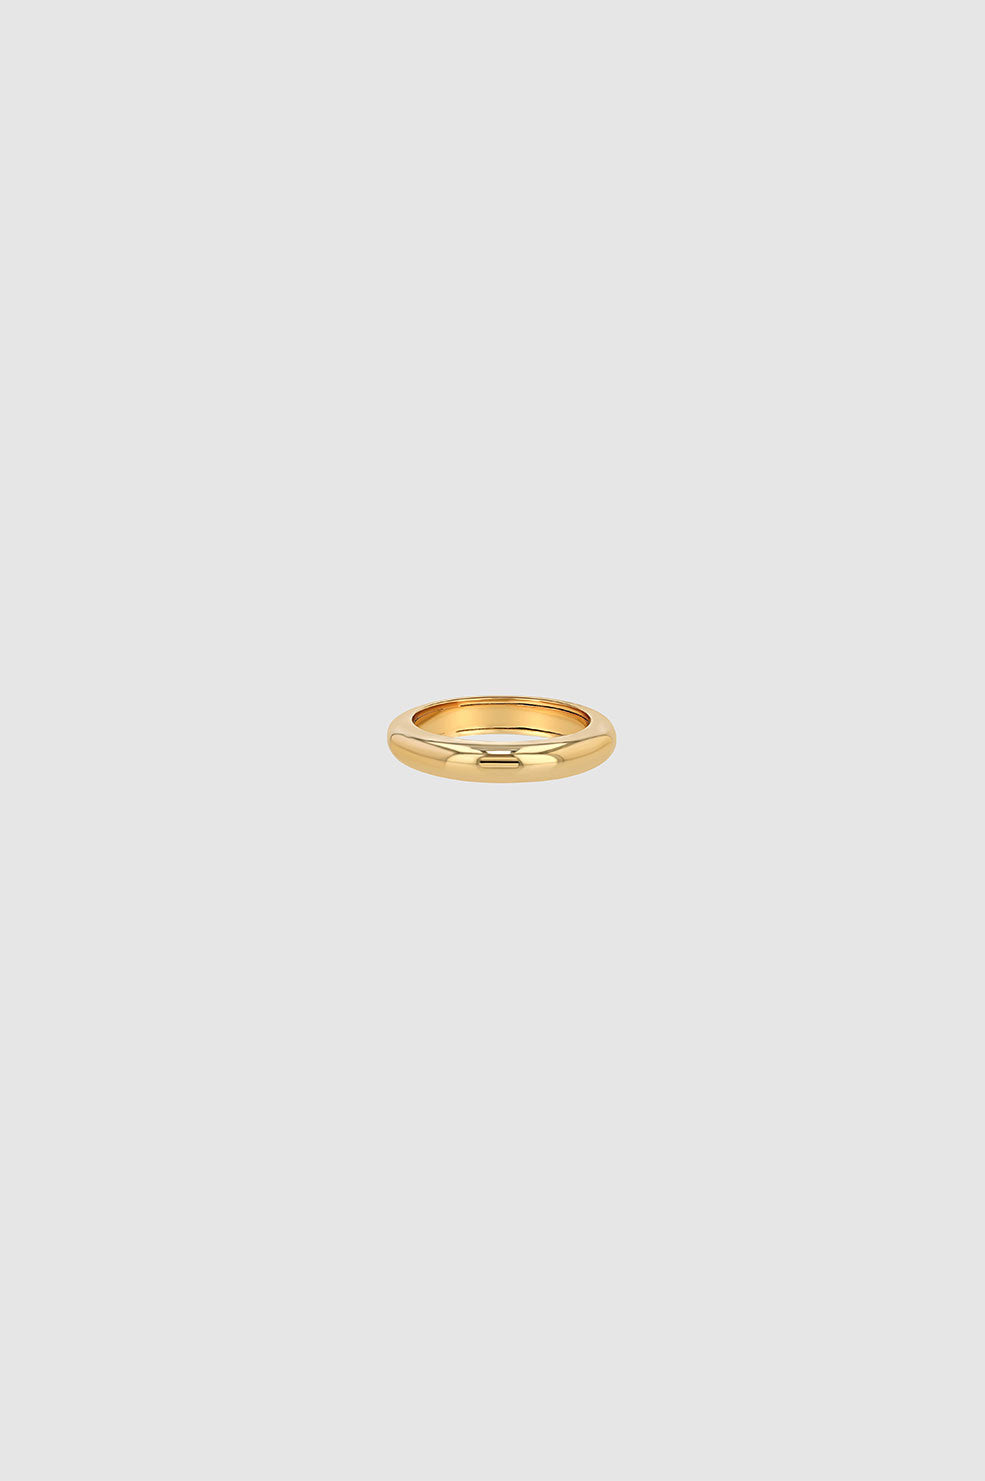 ANINE BING Delicate Pinky Ring - 14k Gold - Top View